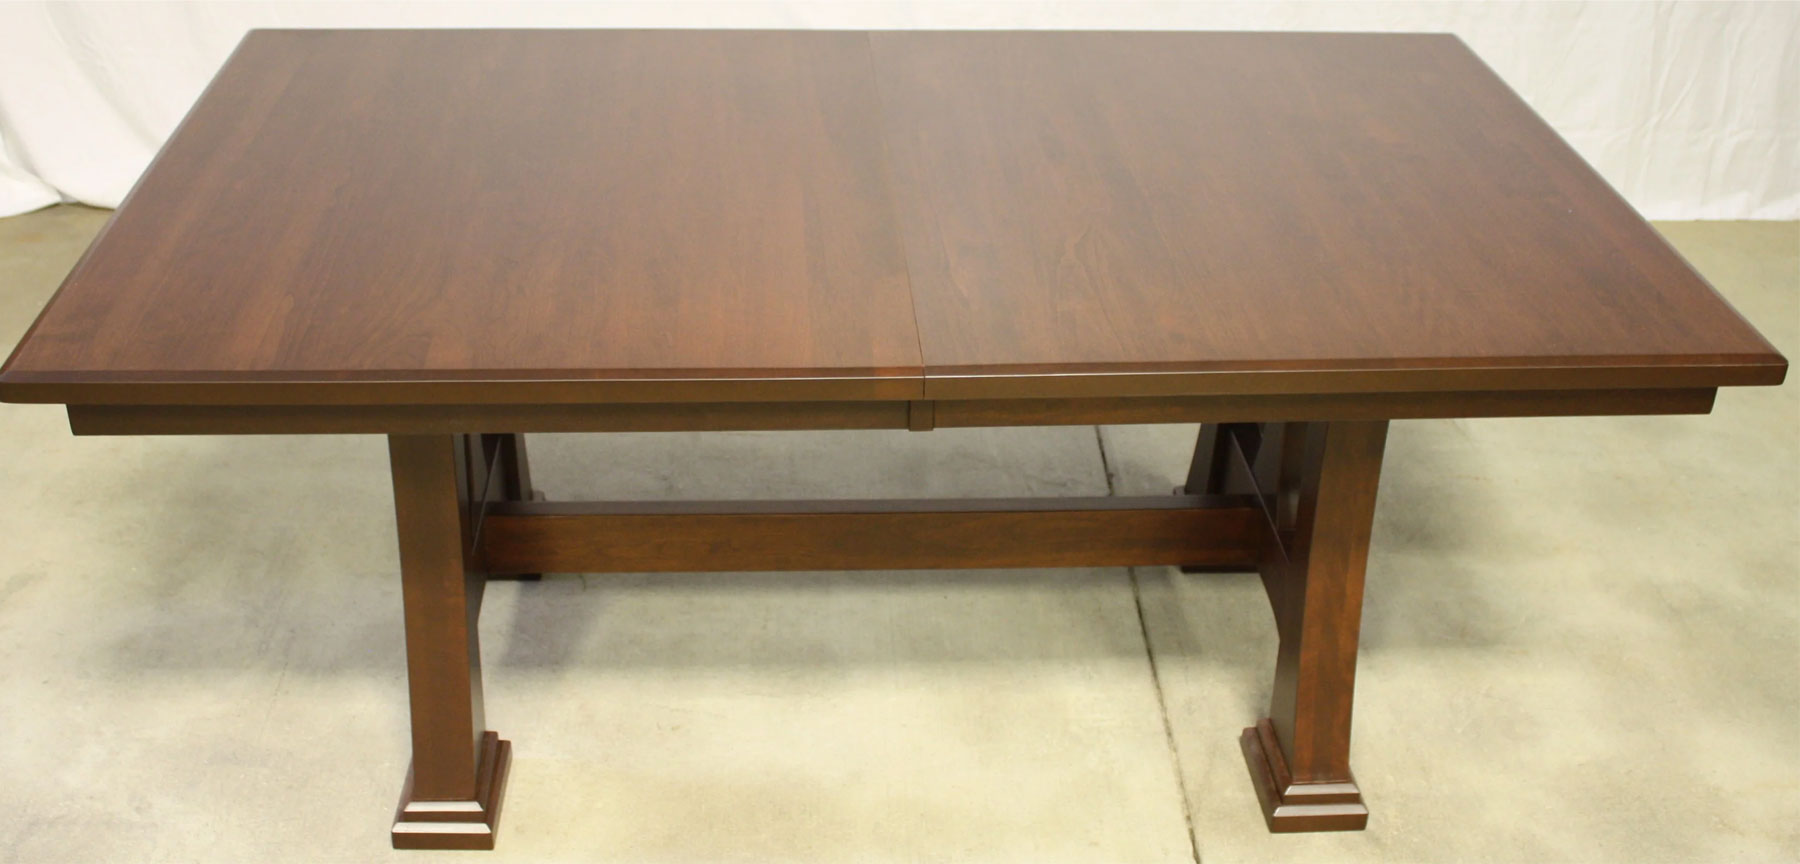 Christy 42 x 72 Double Pedestal Table with (2) Leaves in Cherry